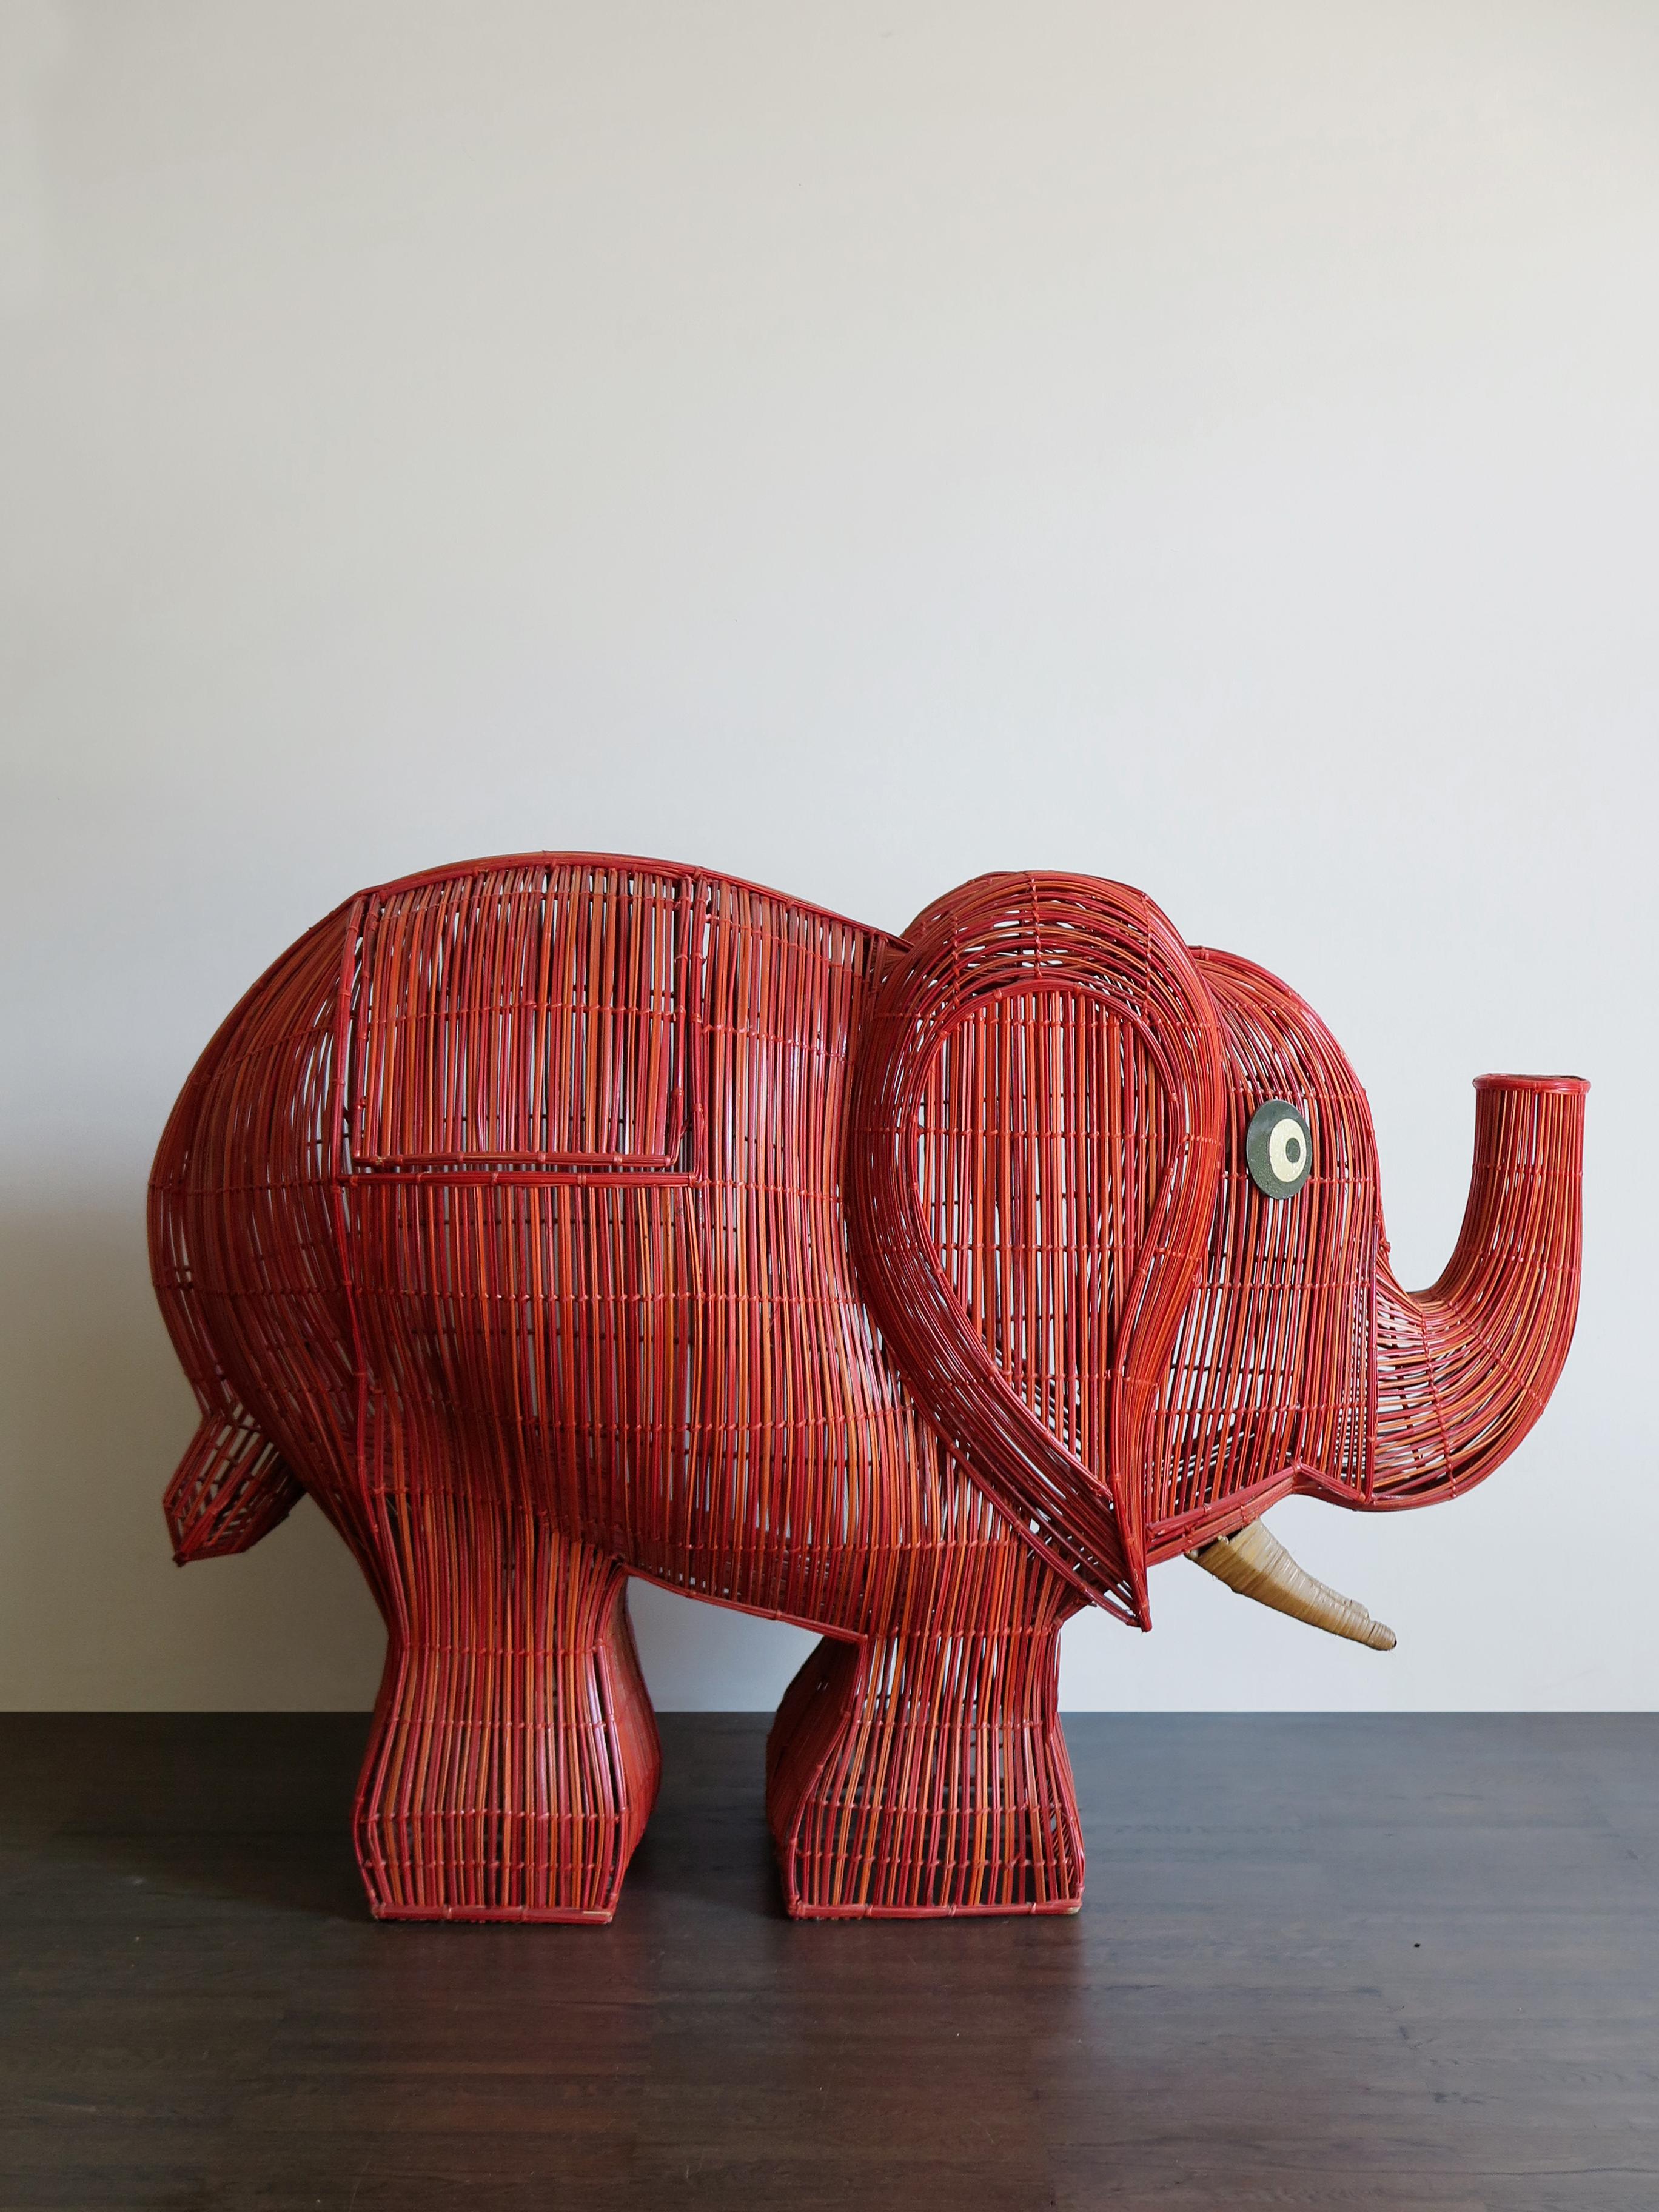 Italian midcentury wicker elephant / container with opening for possible insertion of objects, circa 1960s.